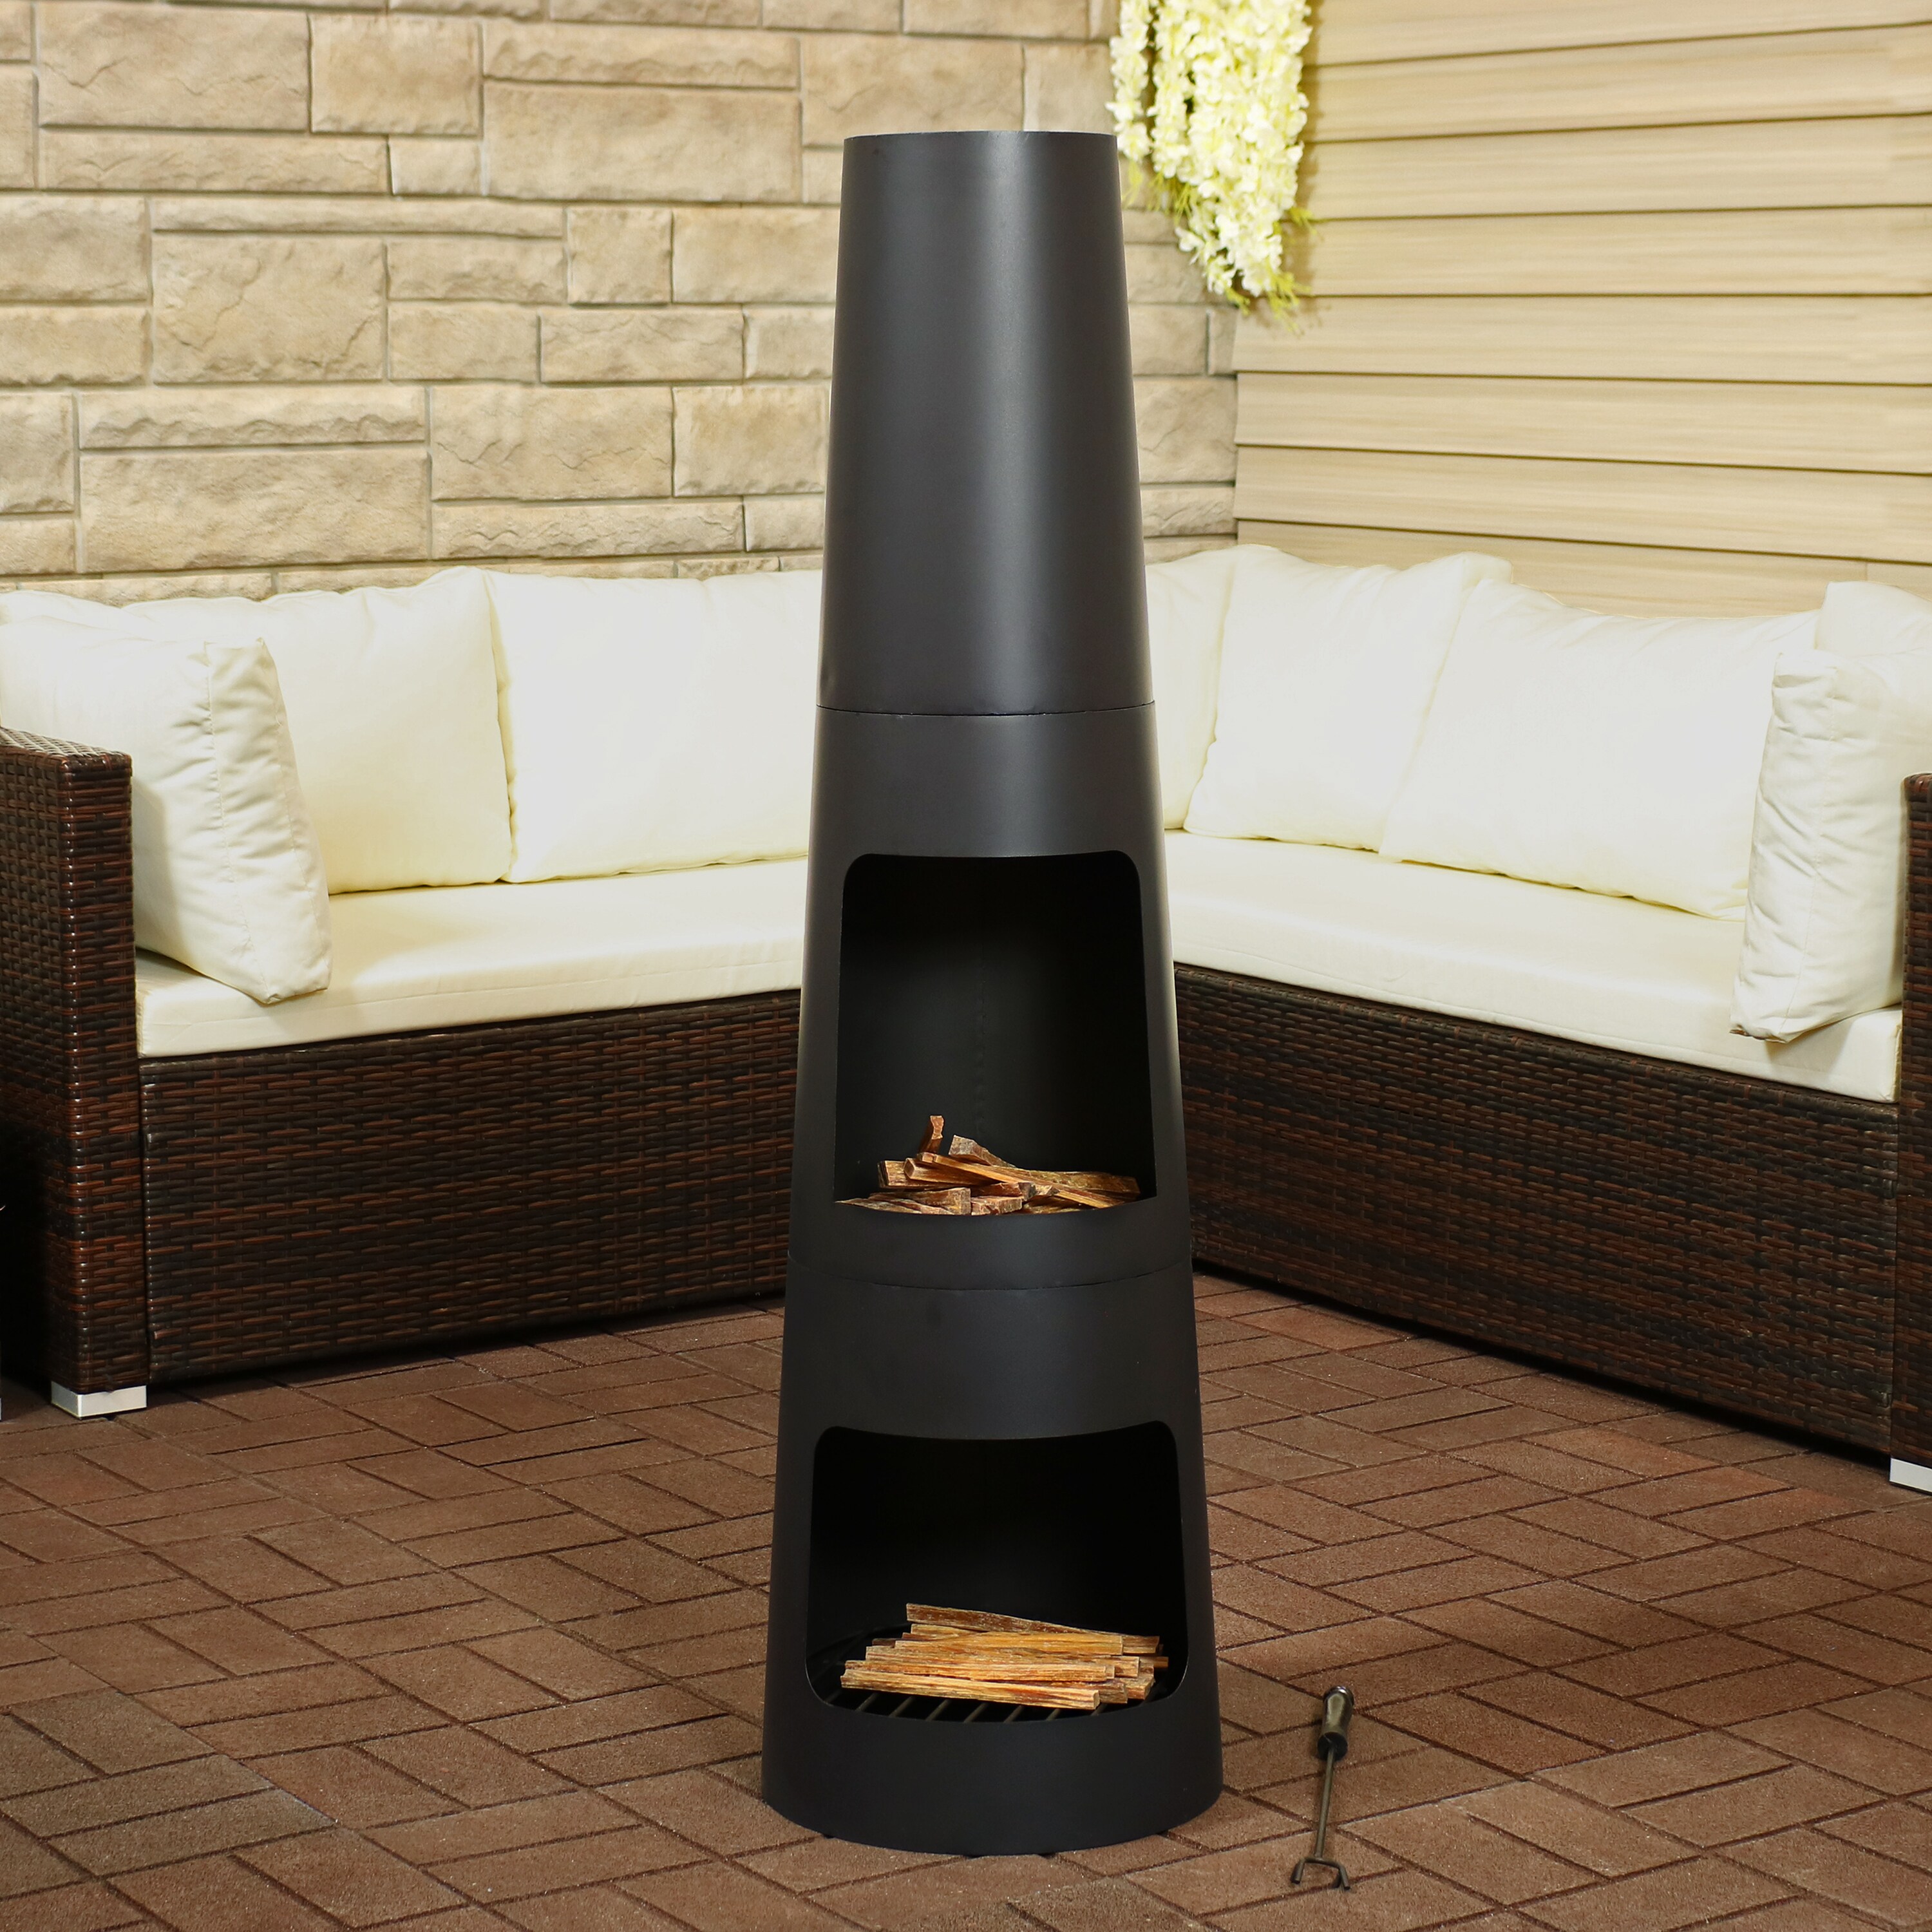 49 Inch Tall Sunnydaze Steel Outdoor Wood Burning Chiminea Fire Pit with Built-in Log Storage Heavy Duty Metal Patio and Backyard Modern Fireplace 